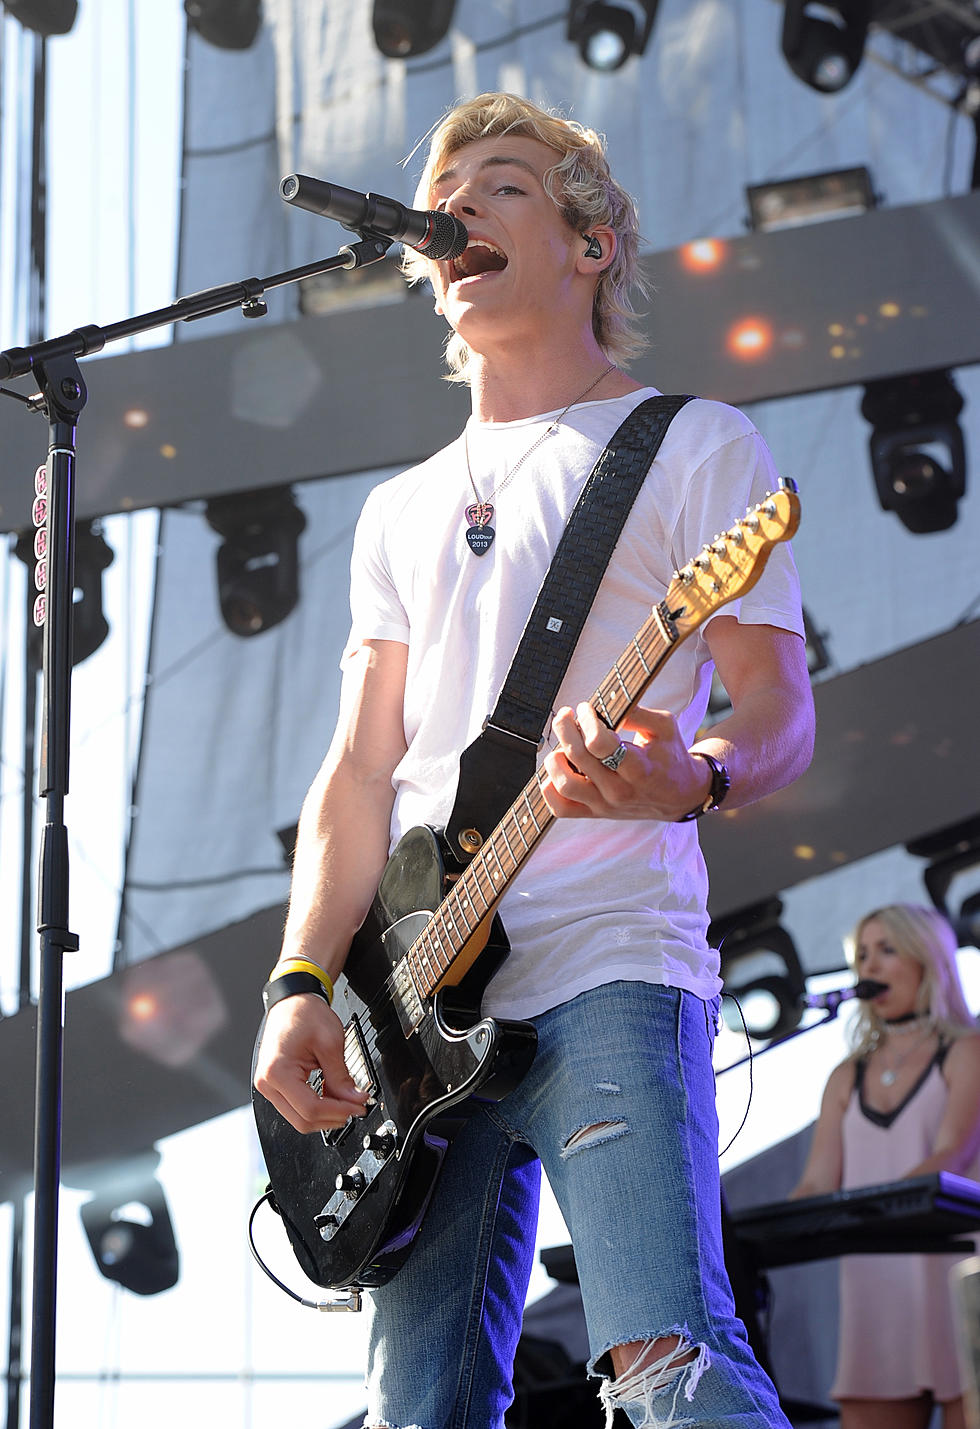 R5 to Wrap up Their International Tour With a Stop in Sioux City in March